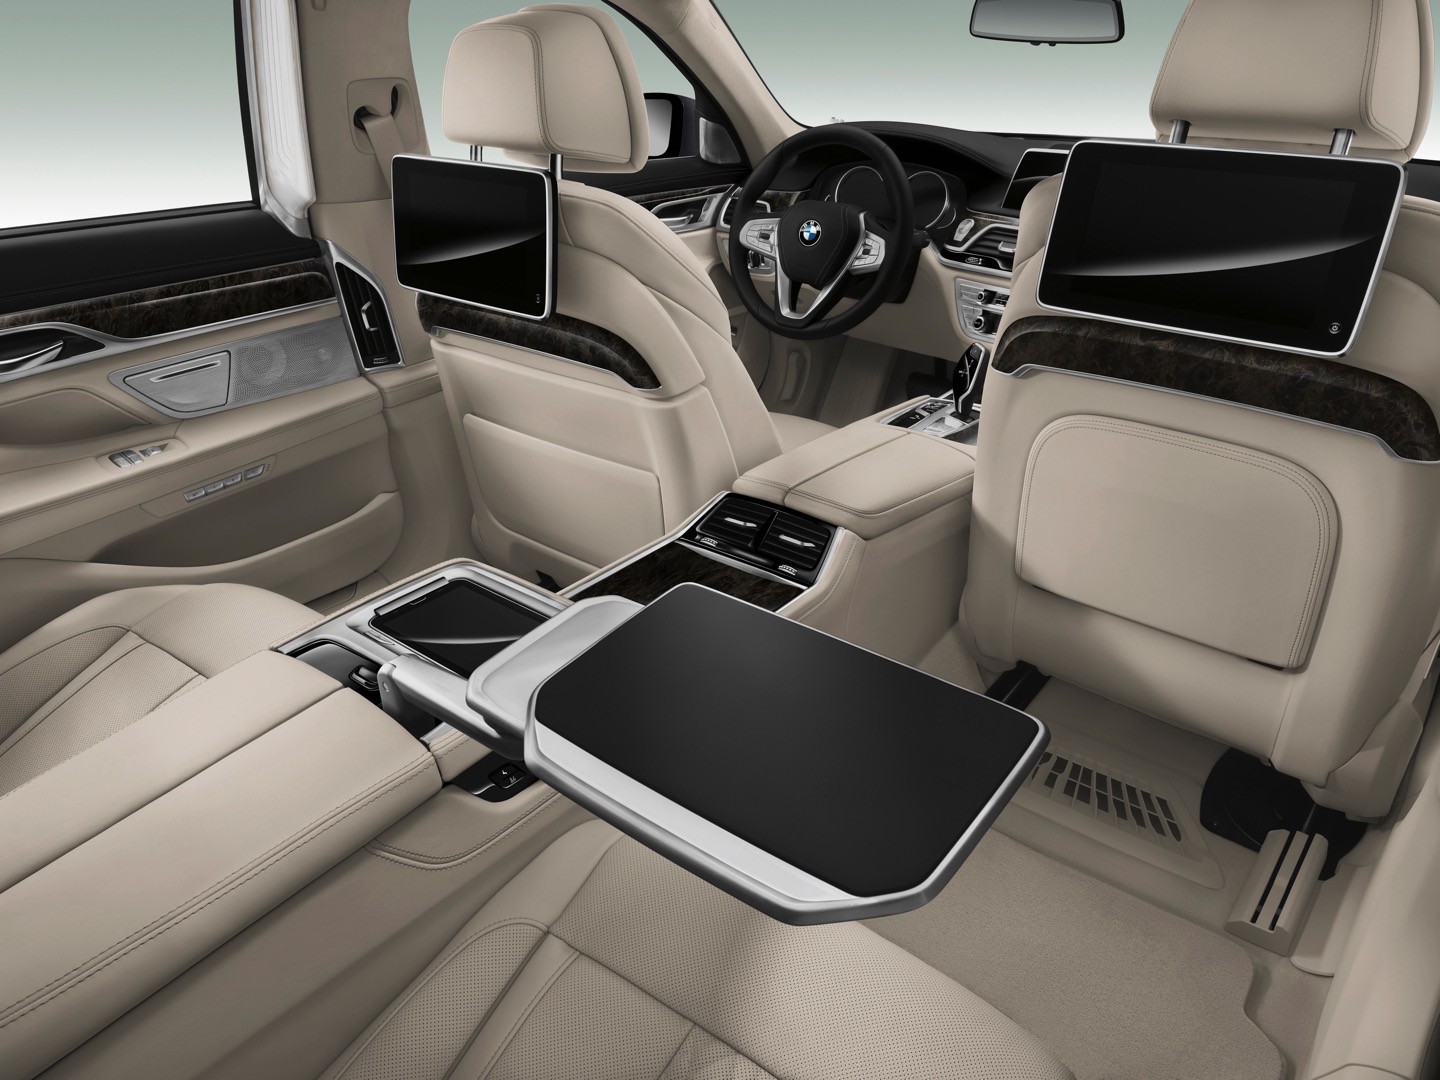 2016-bmw-7-series-finally-officially-unveiled-the-good-stuffs-inside-photo-gallery_119